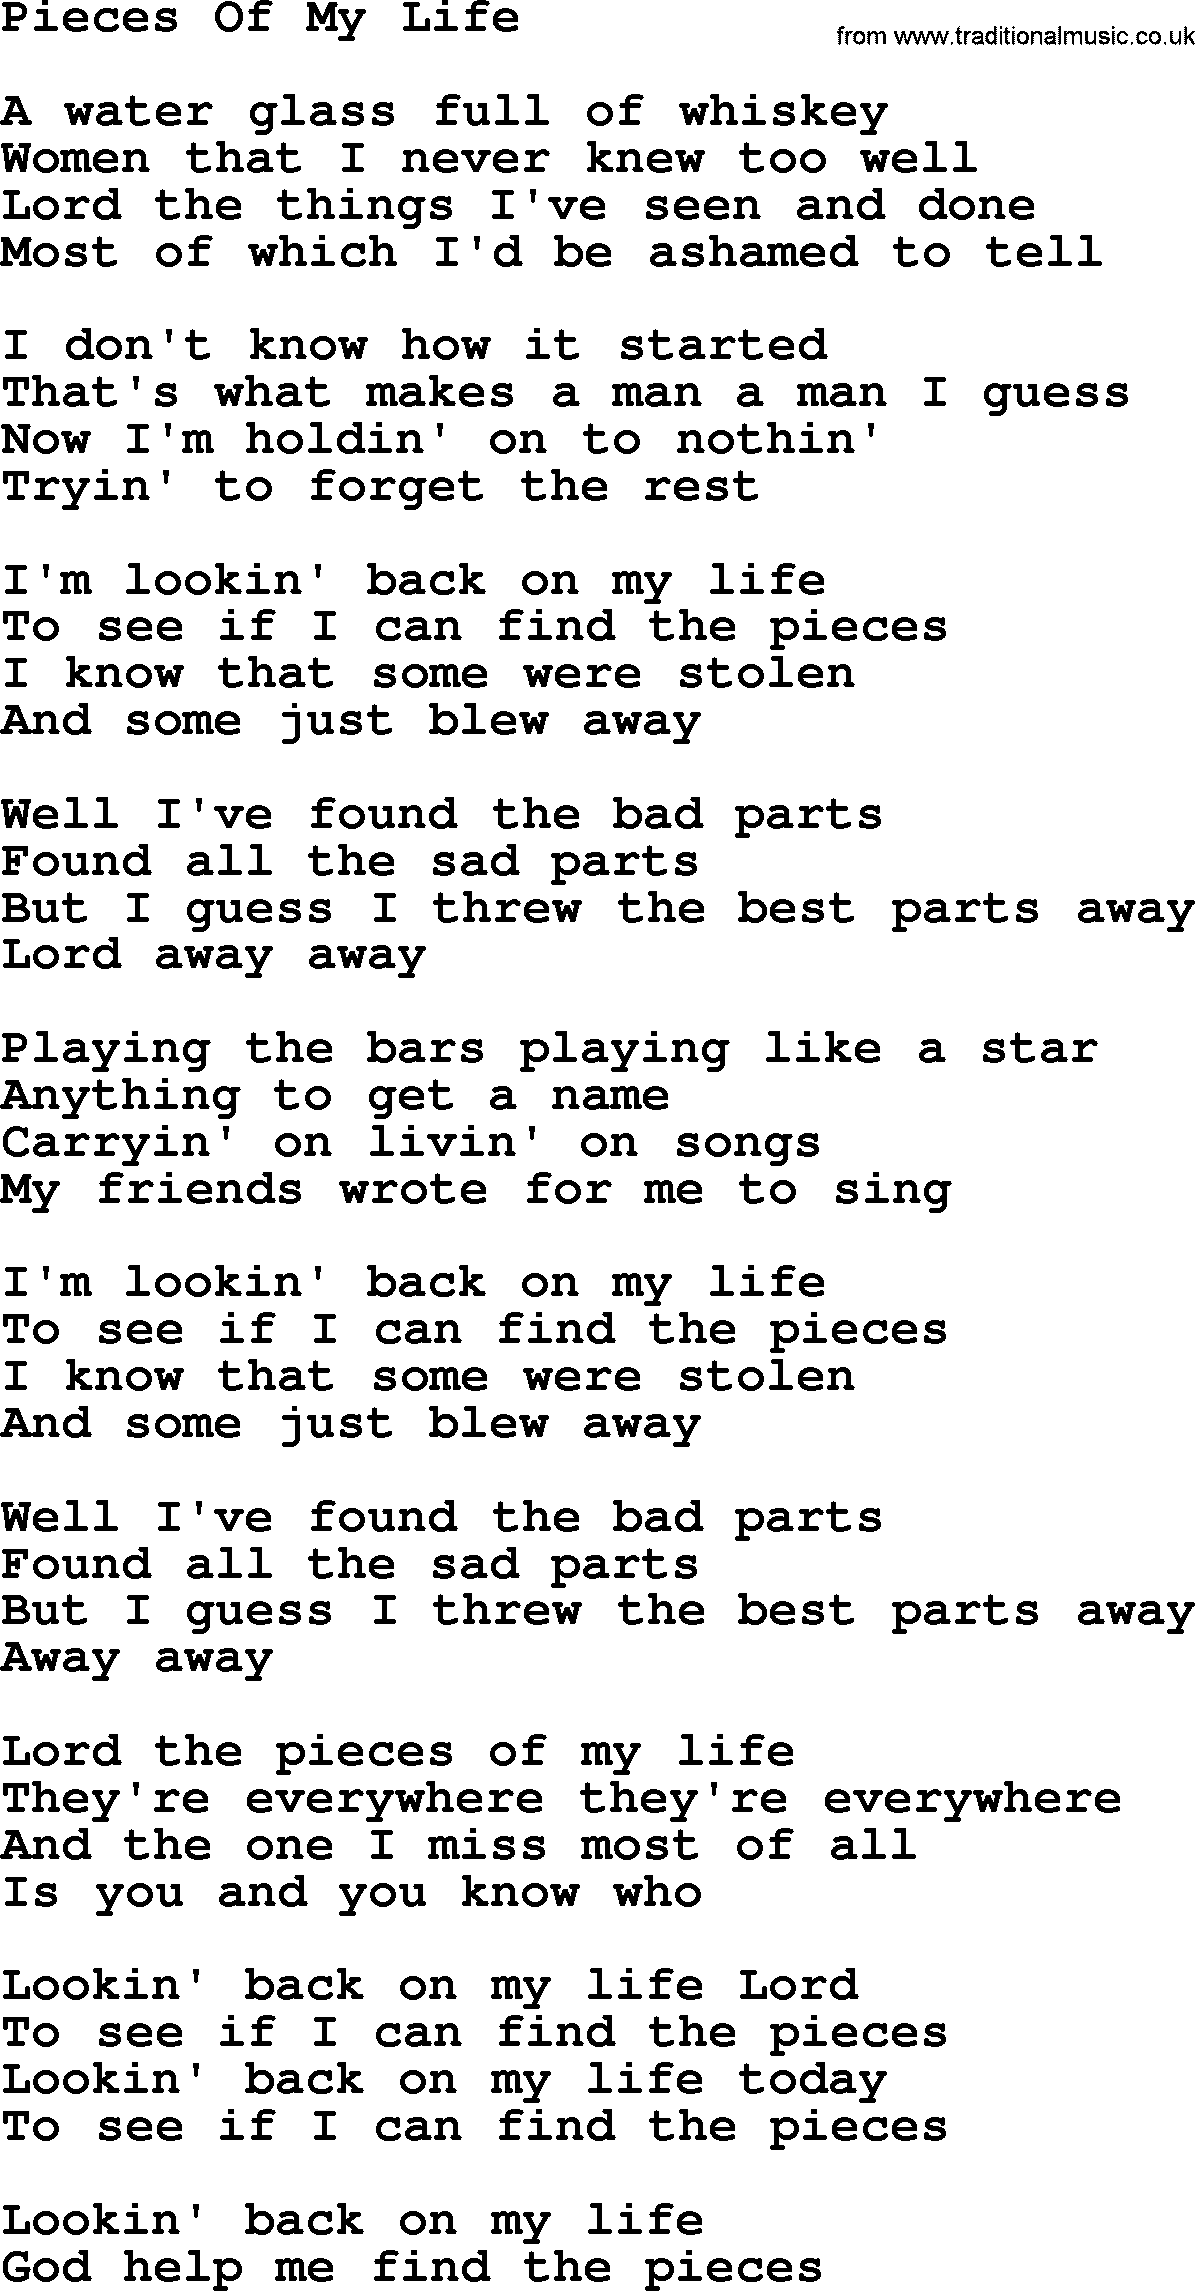 Willie Nelson song: Pieces Of My Life lyrics